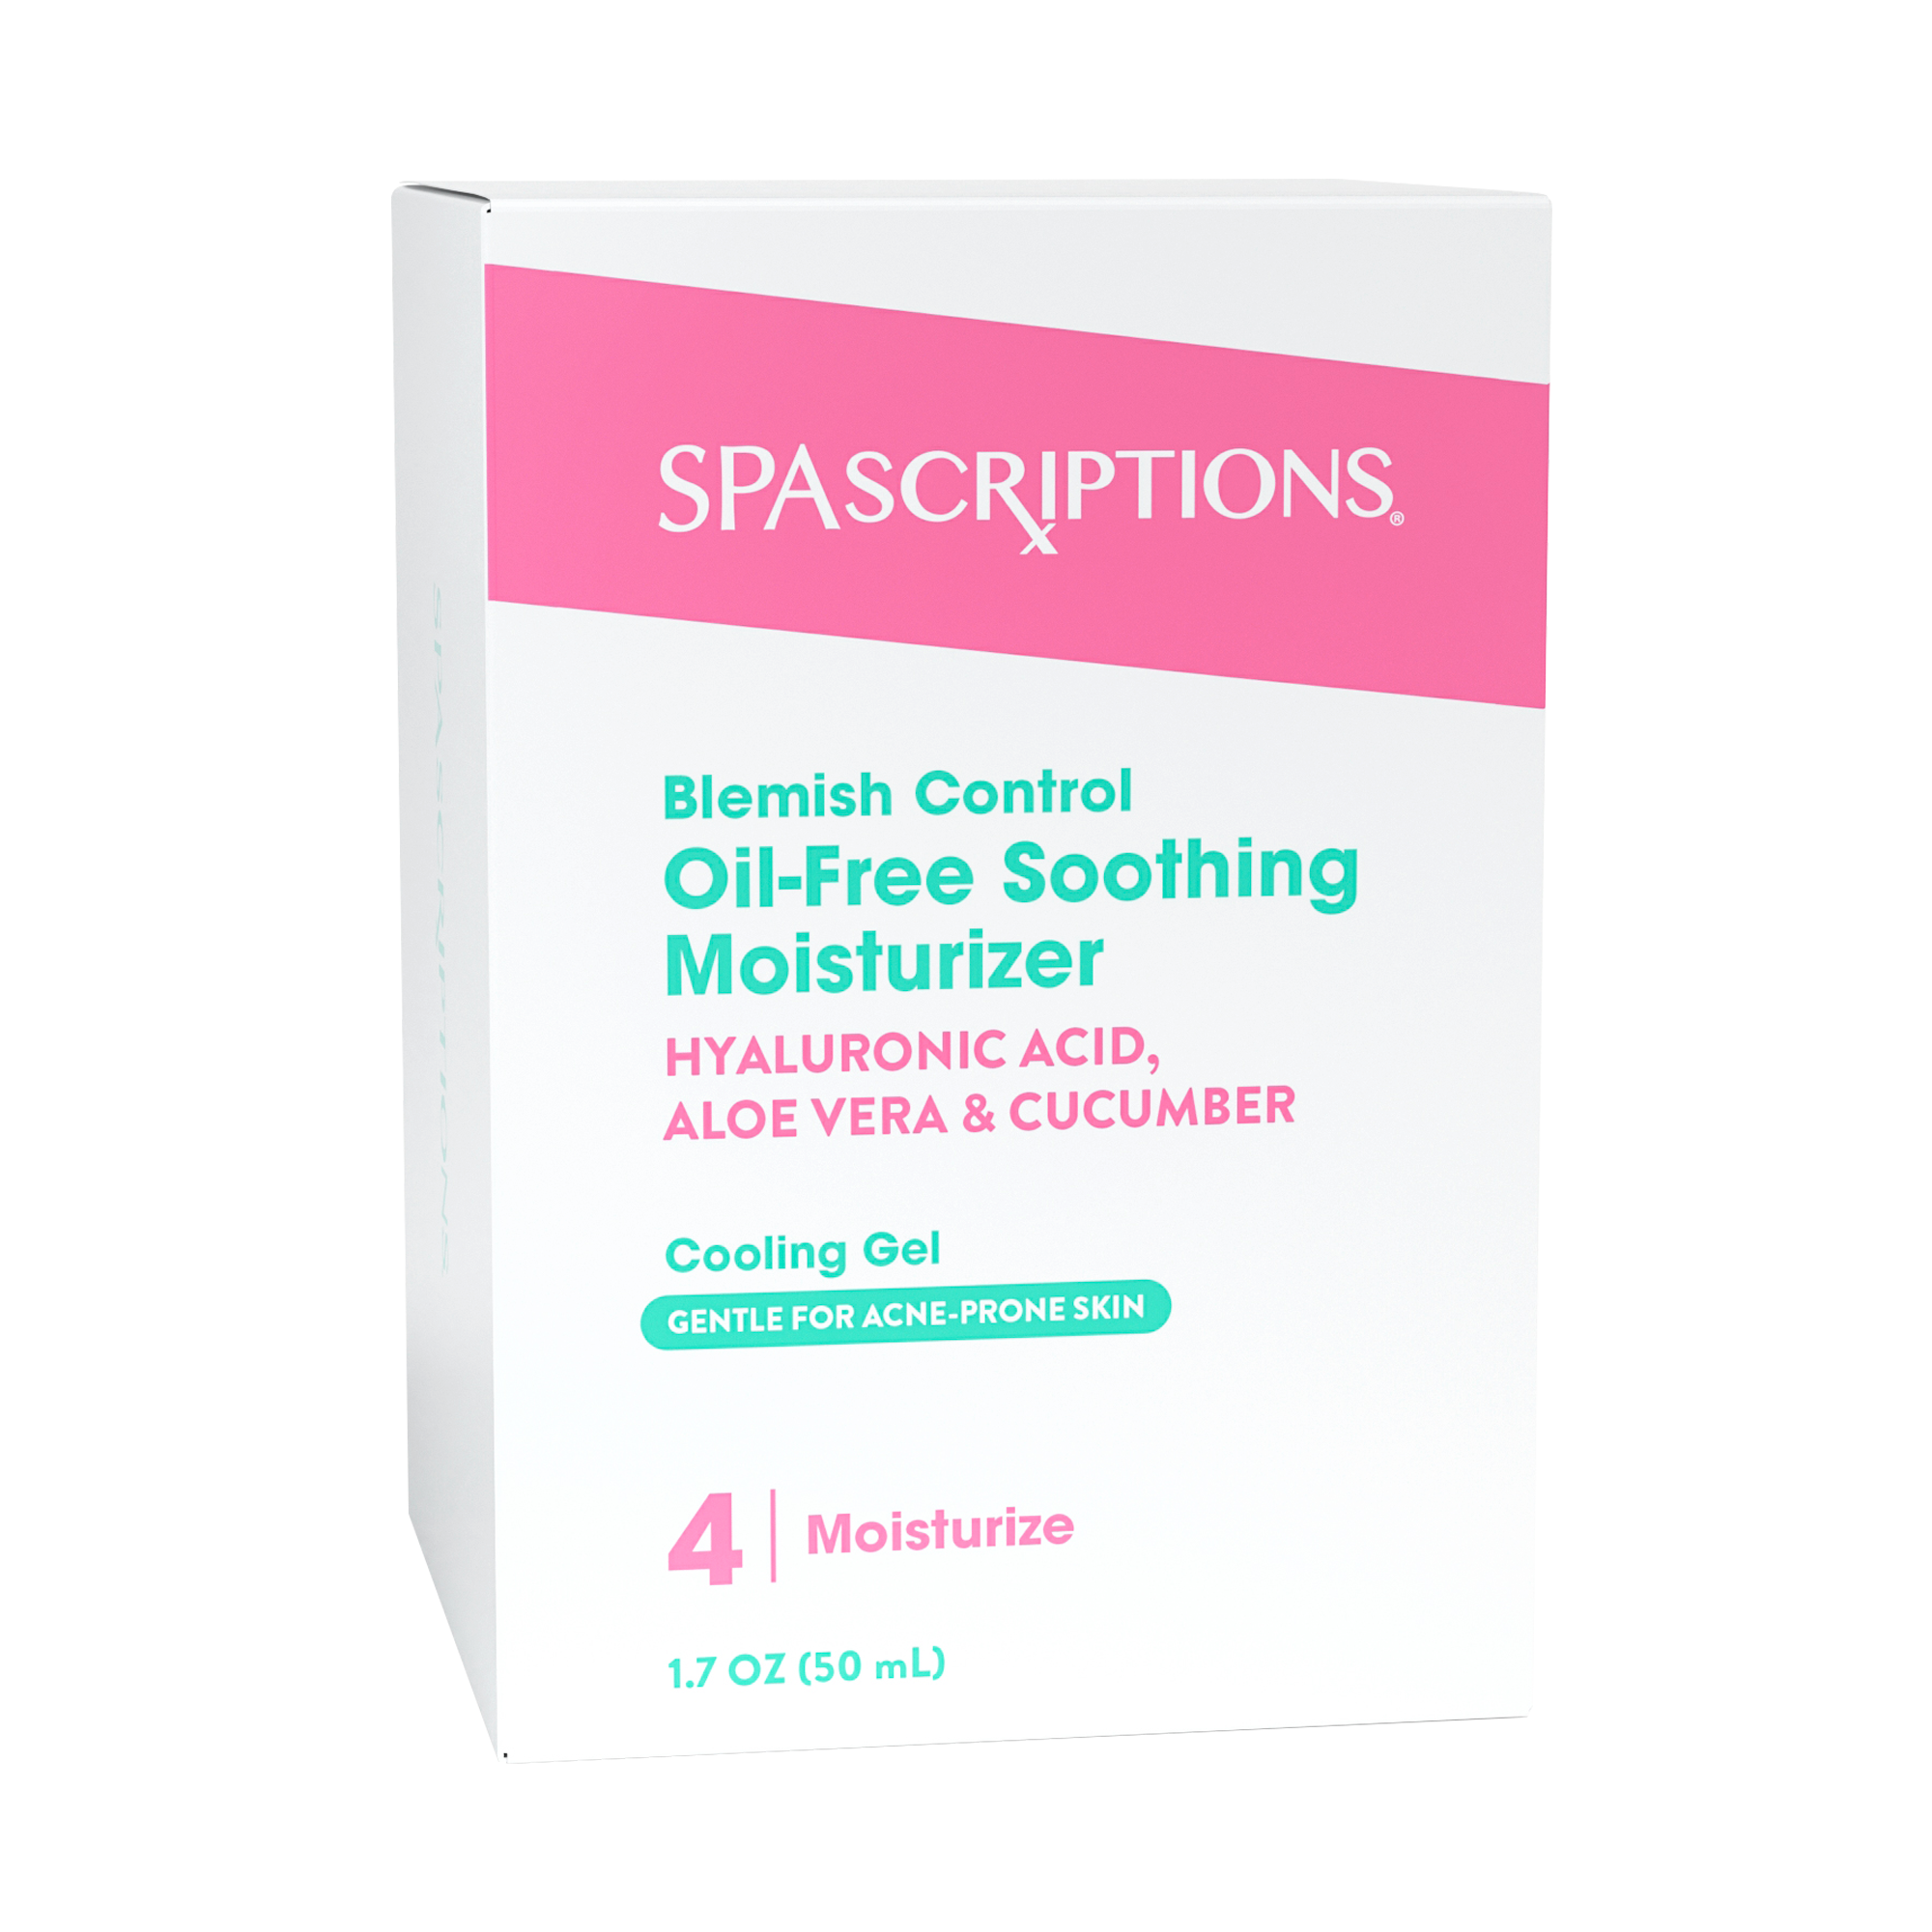 Blemish Control Oil-Free Soothing Moisturizer